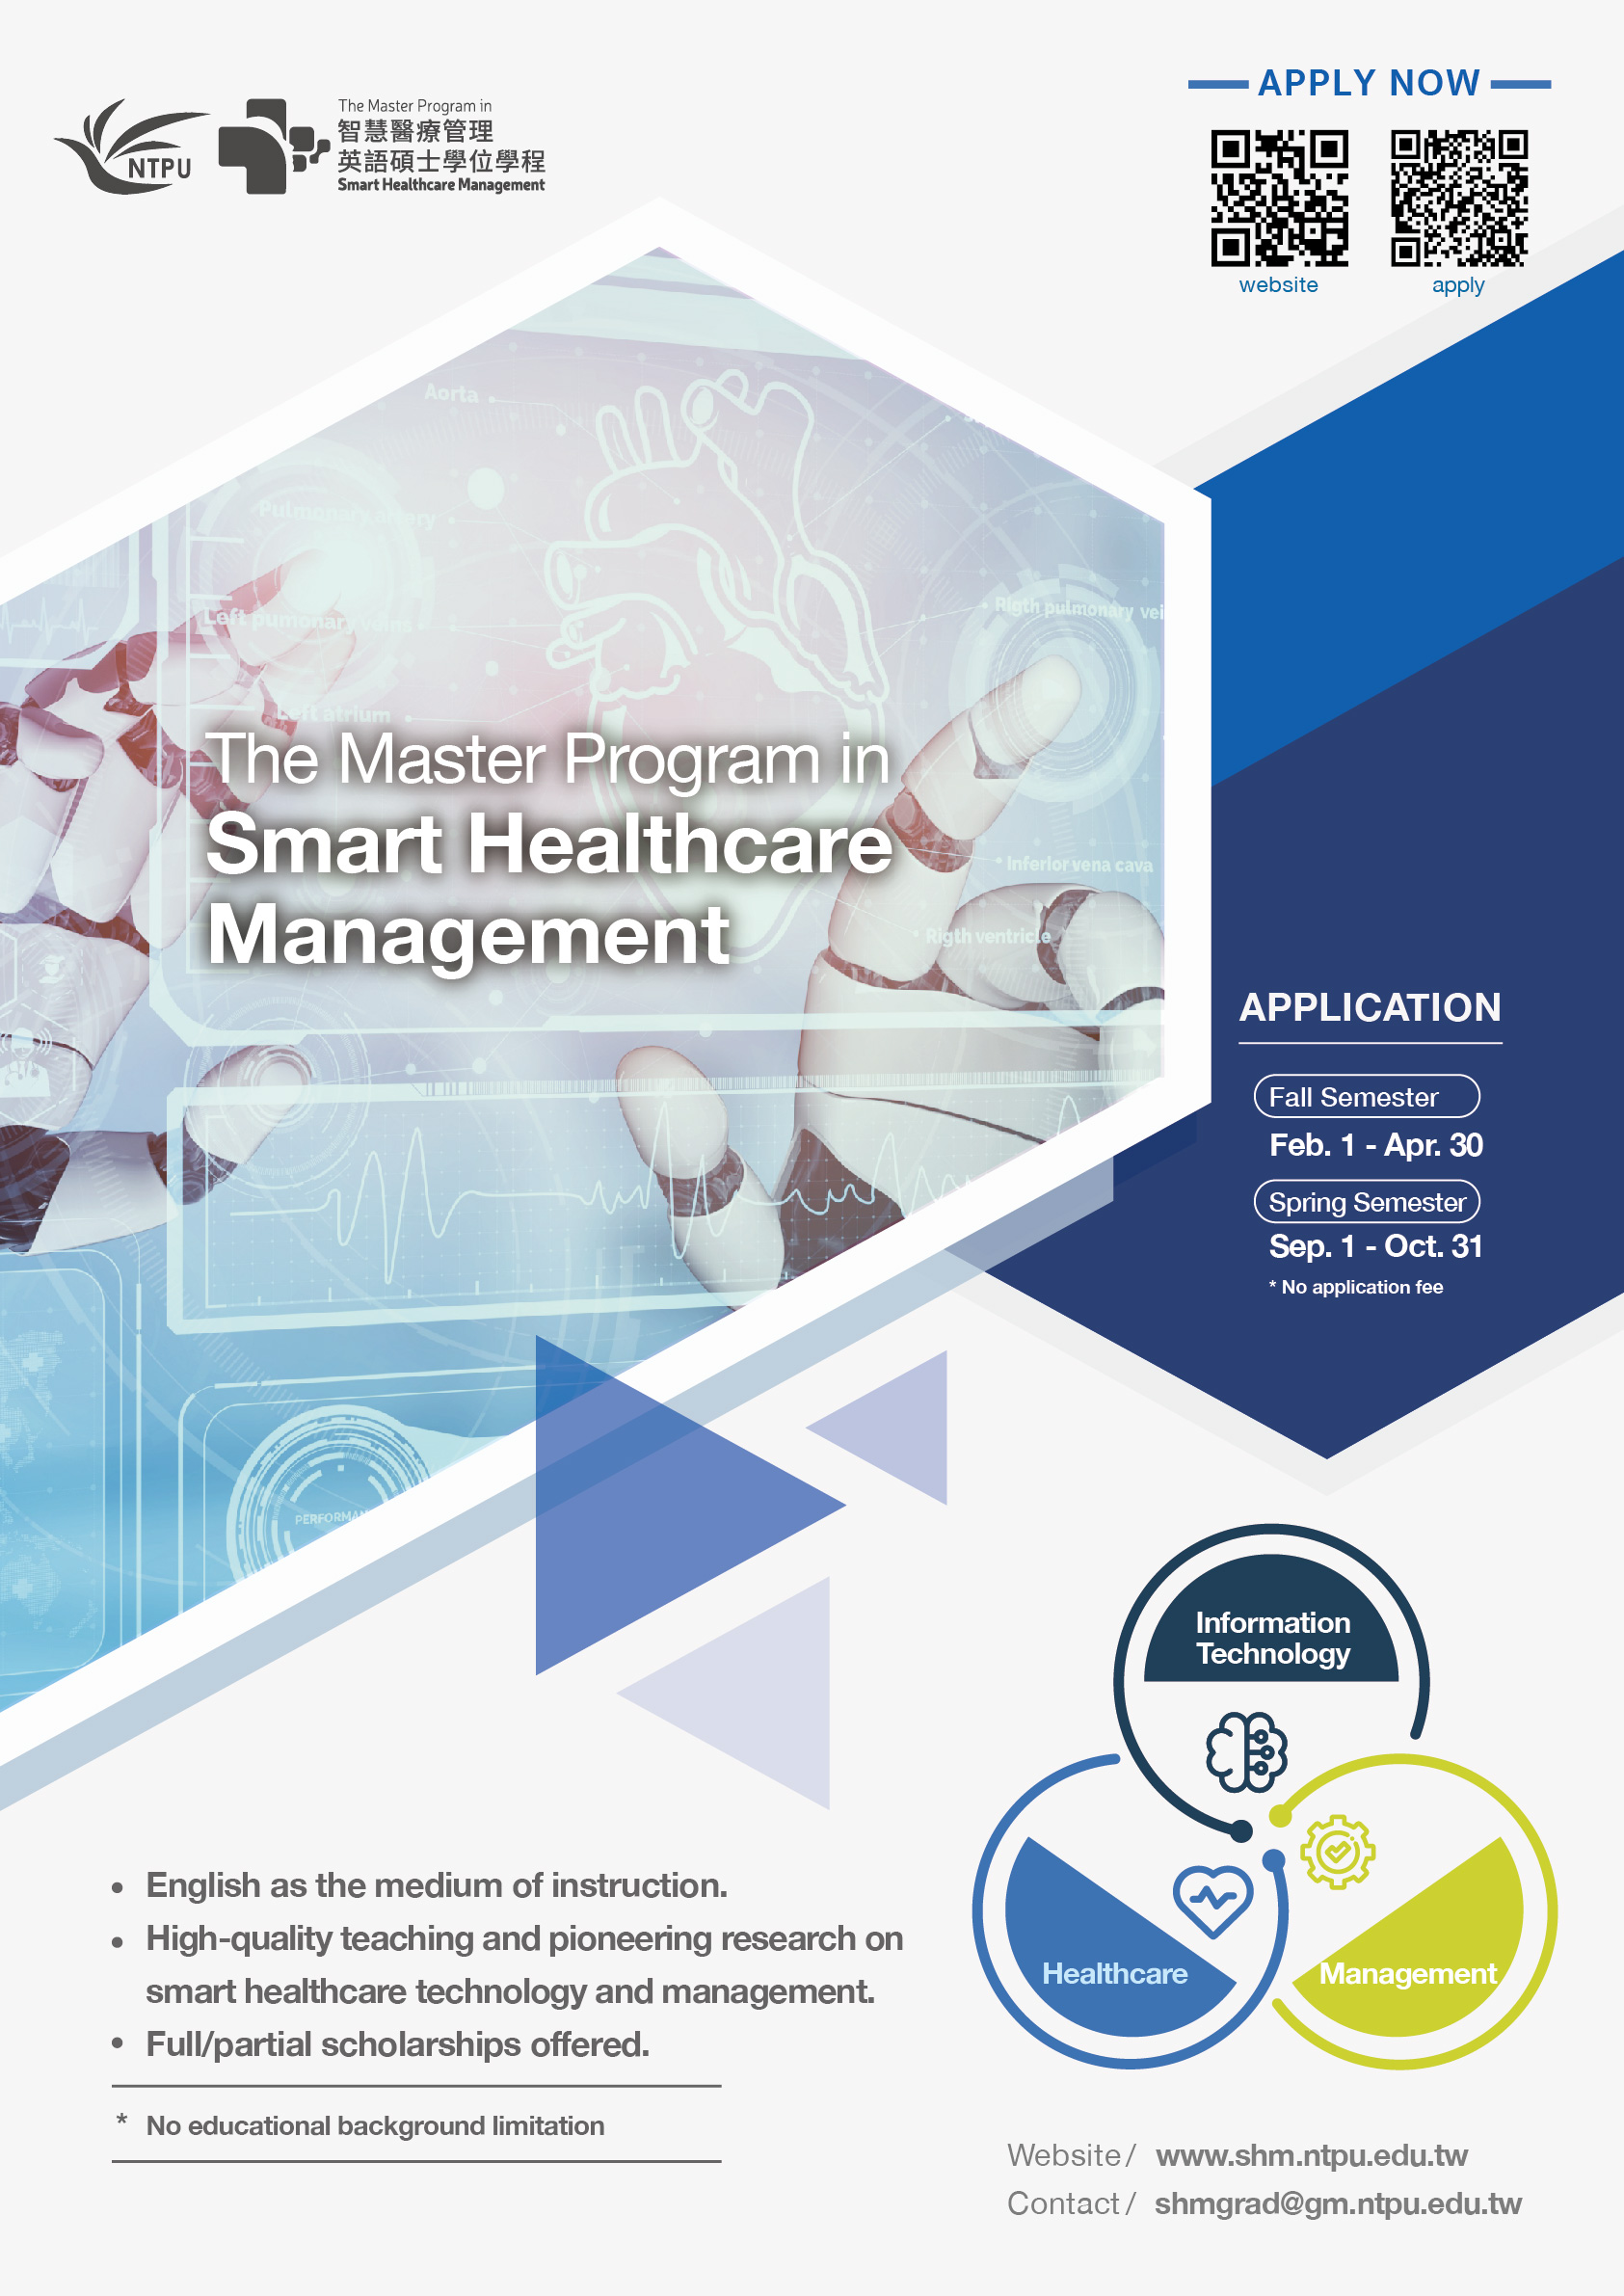 【2021.10.15】Smart Healthcare Management master program at NTPU in Taiwan is now recruiting international students